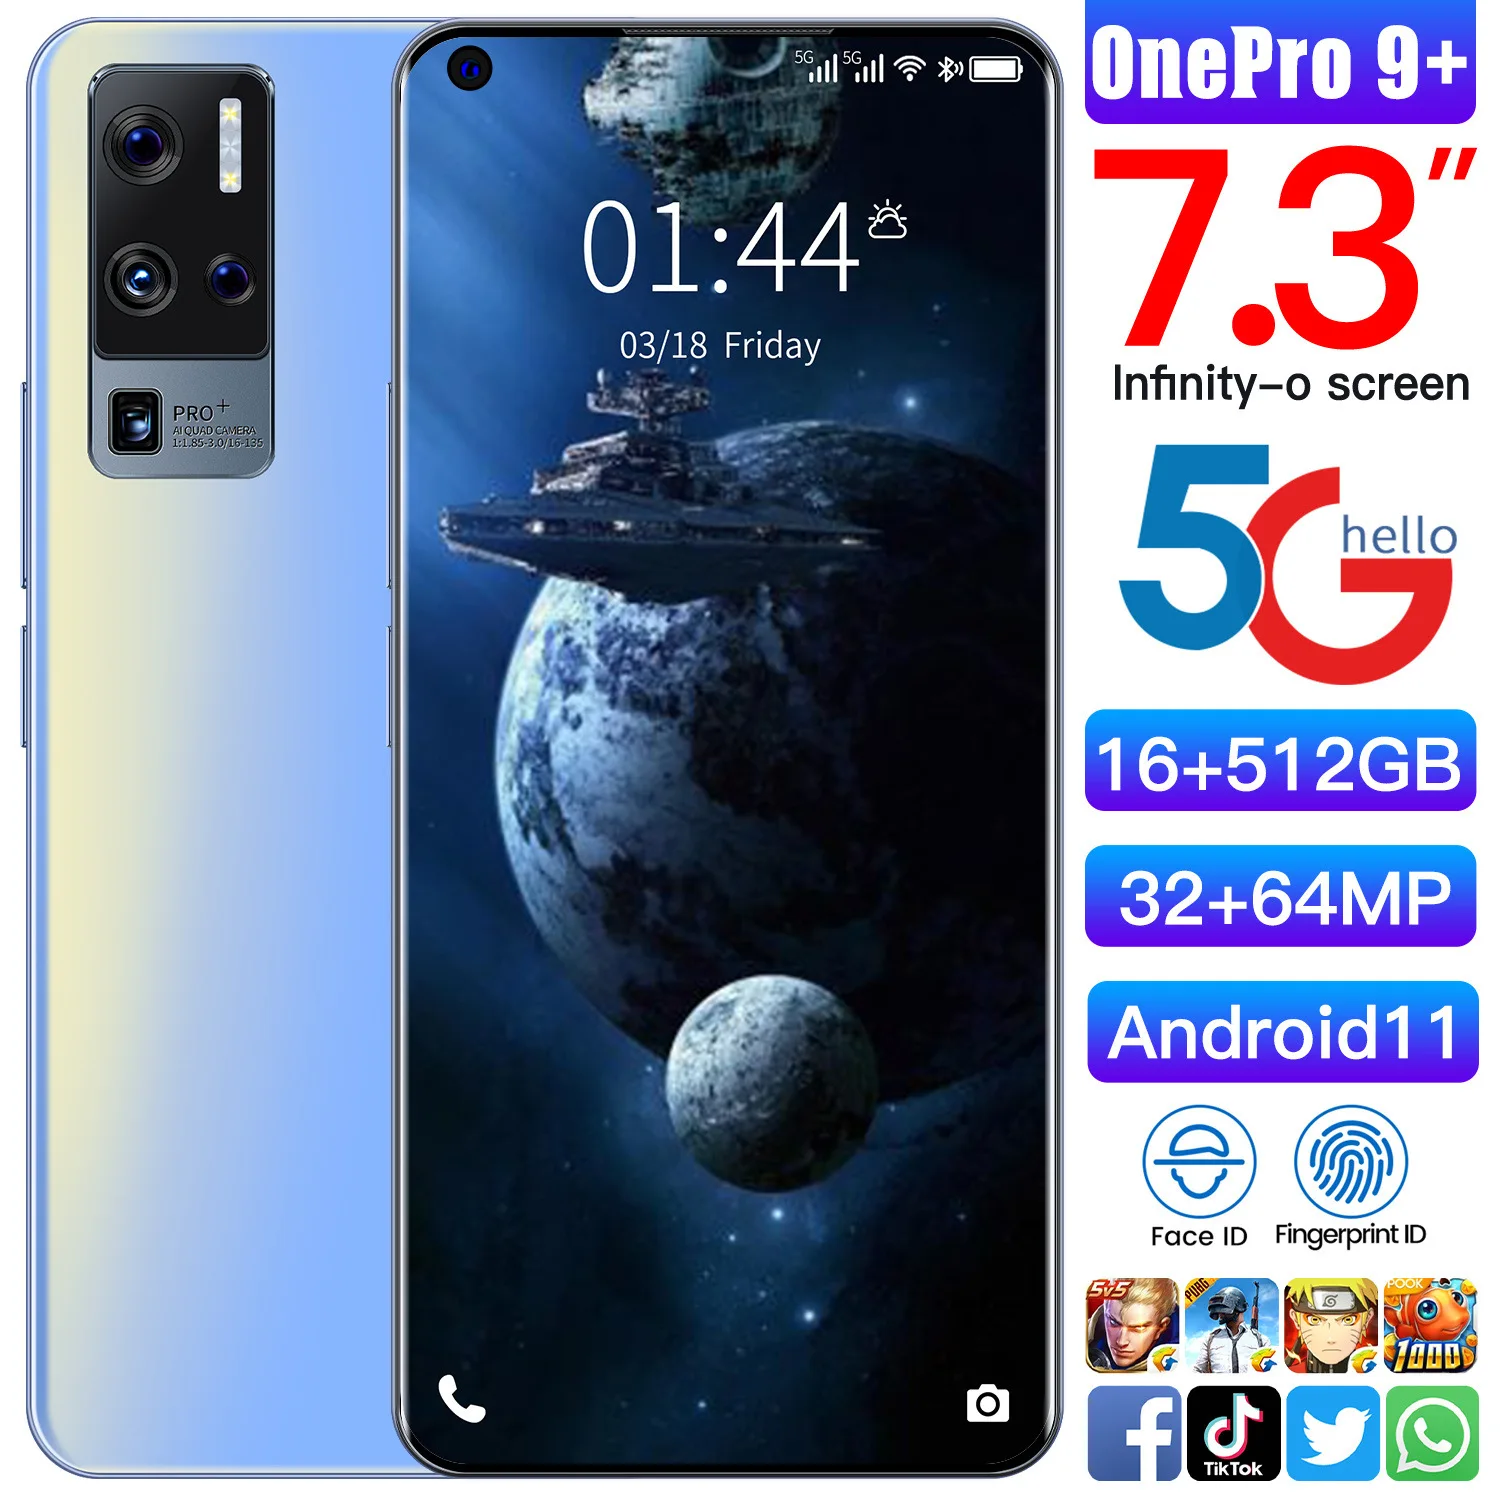 Portable Telephone Android 5G Smartphone OnePro 9+ 7.3